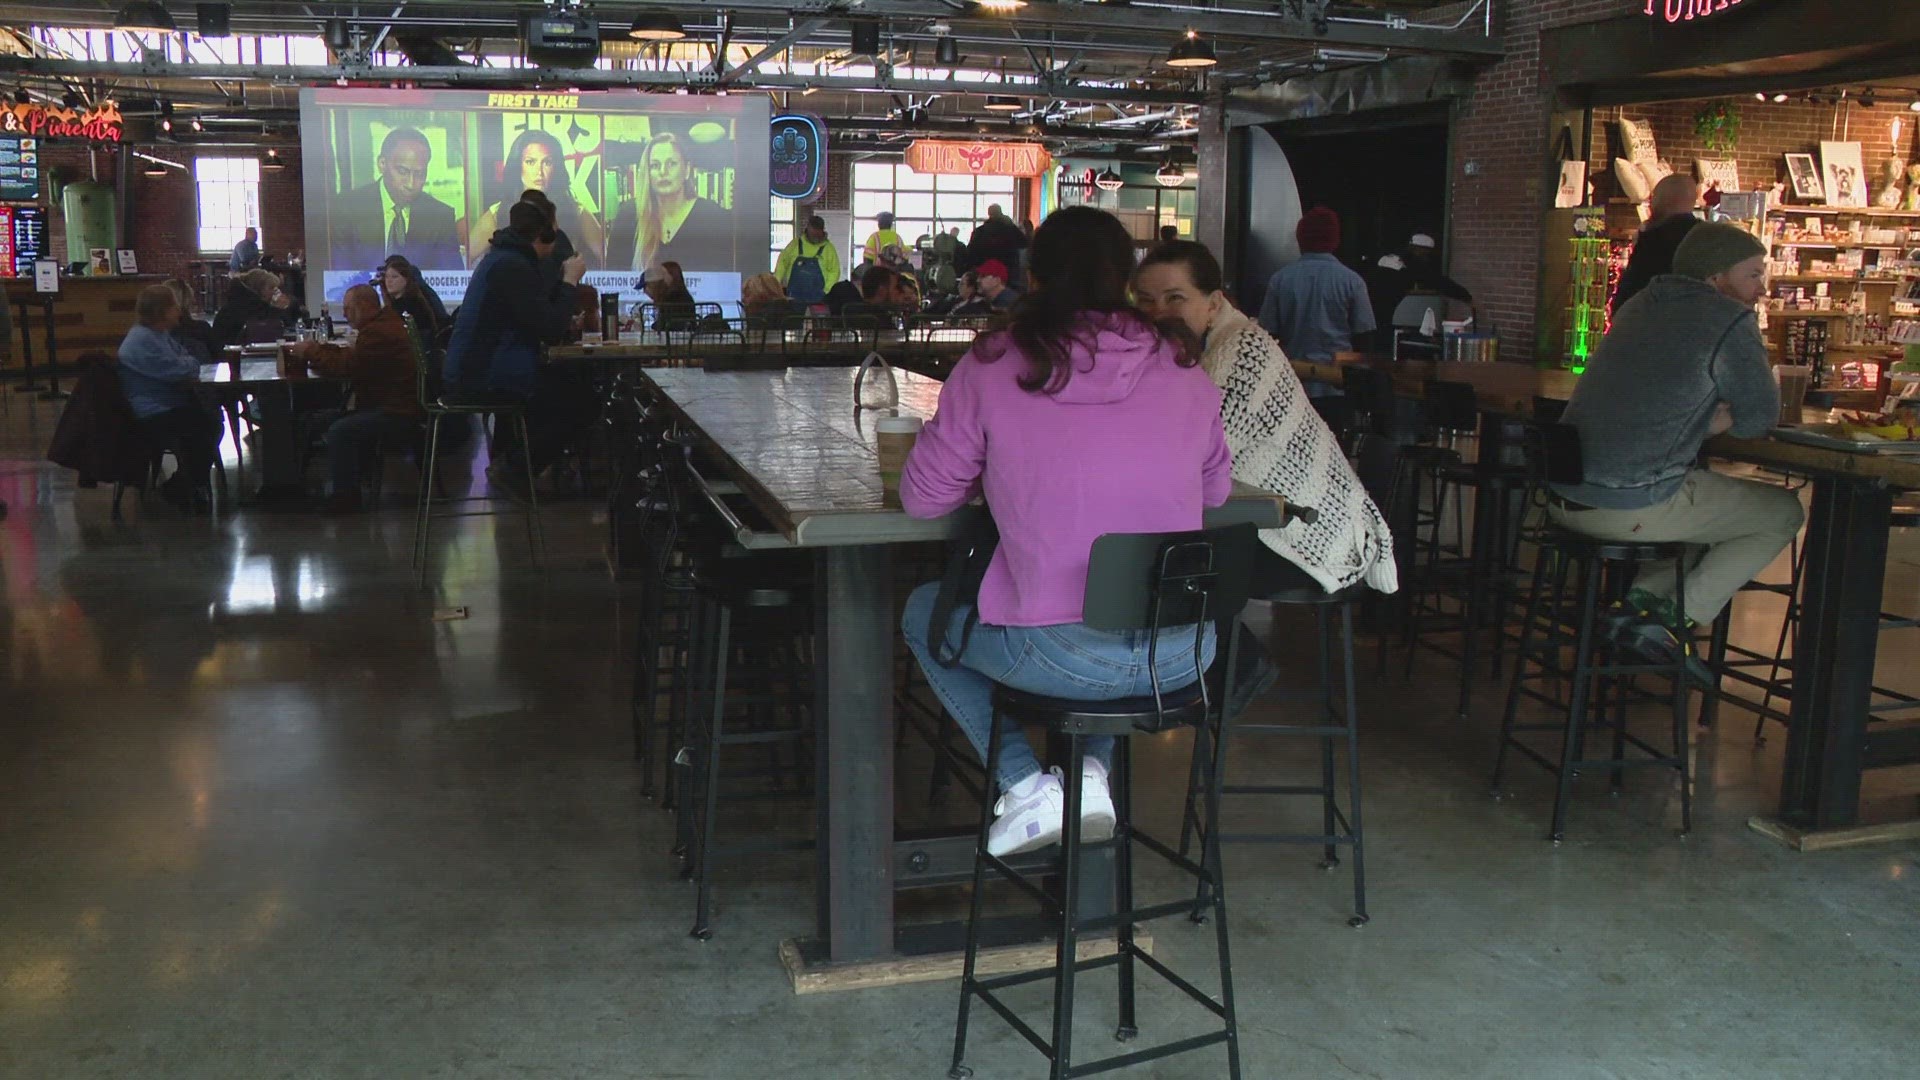 13News reporter Lauren Kostiuk reports from Bottleworks ahead of the first big night of the NCAA men's basketball tournament.